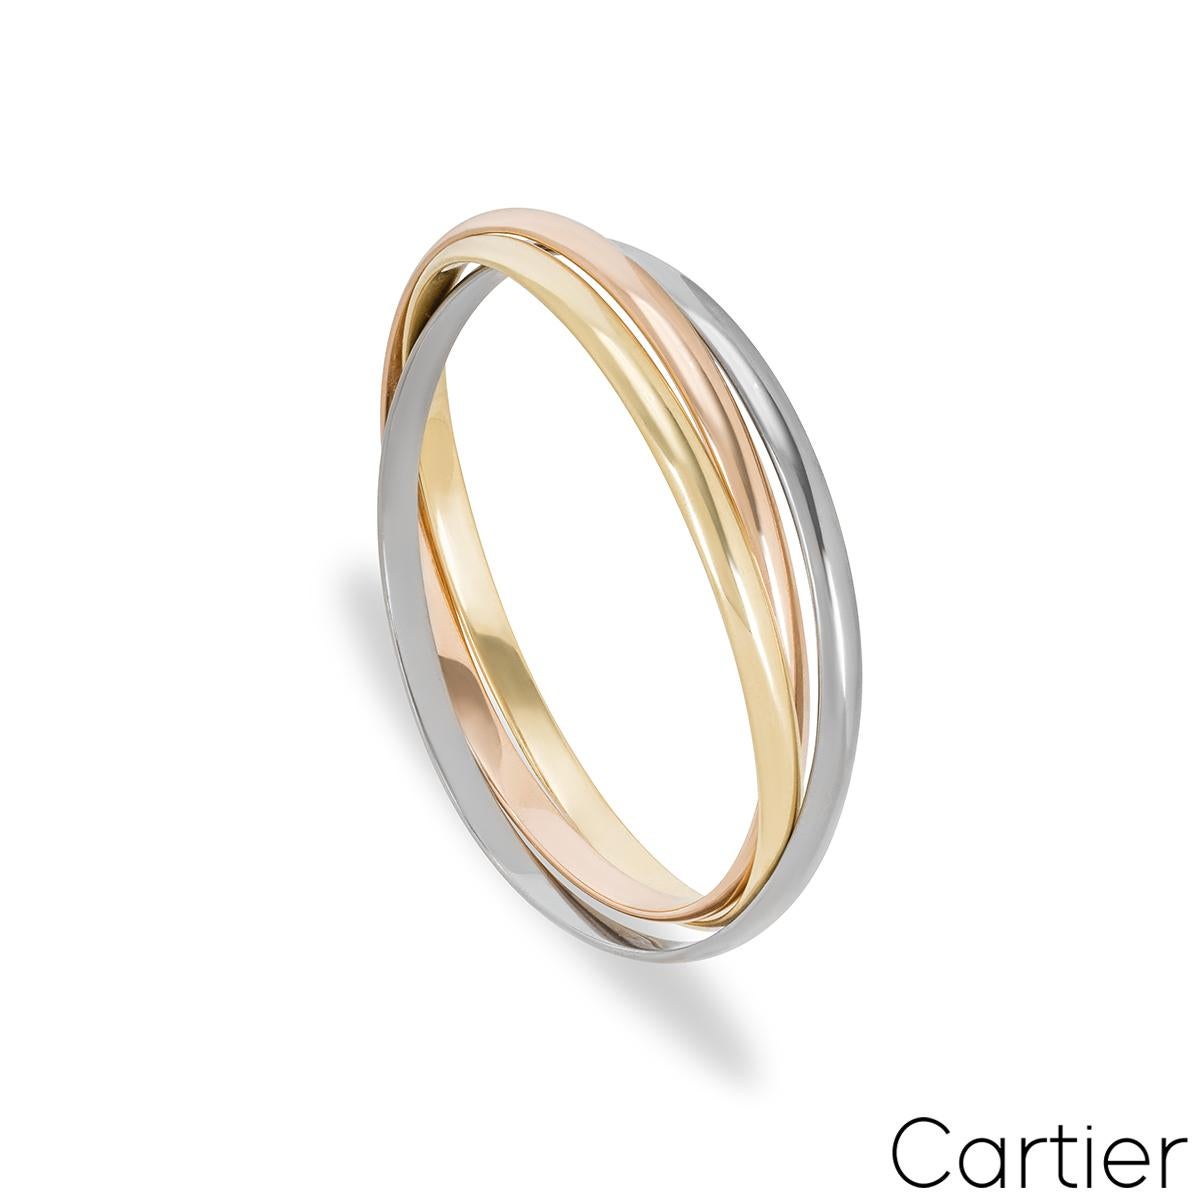 An iconic 18k tri-colour Cartier bracelet from the Trinity De Cartier collection. The bracelet is made up of three intertwined 18k white, rose and yellow gold 4.5mm bands. The bracelet fits a wrist size of up to 18cm and has a gross weight of 56.87